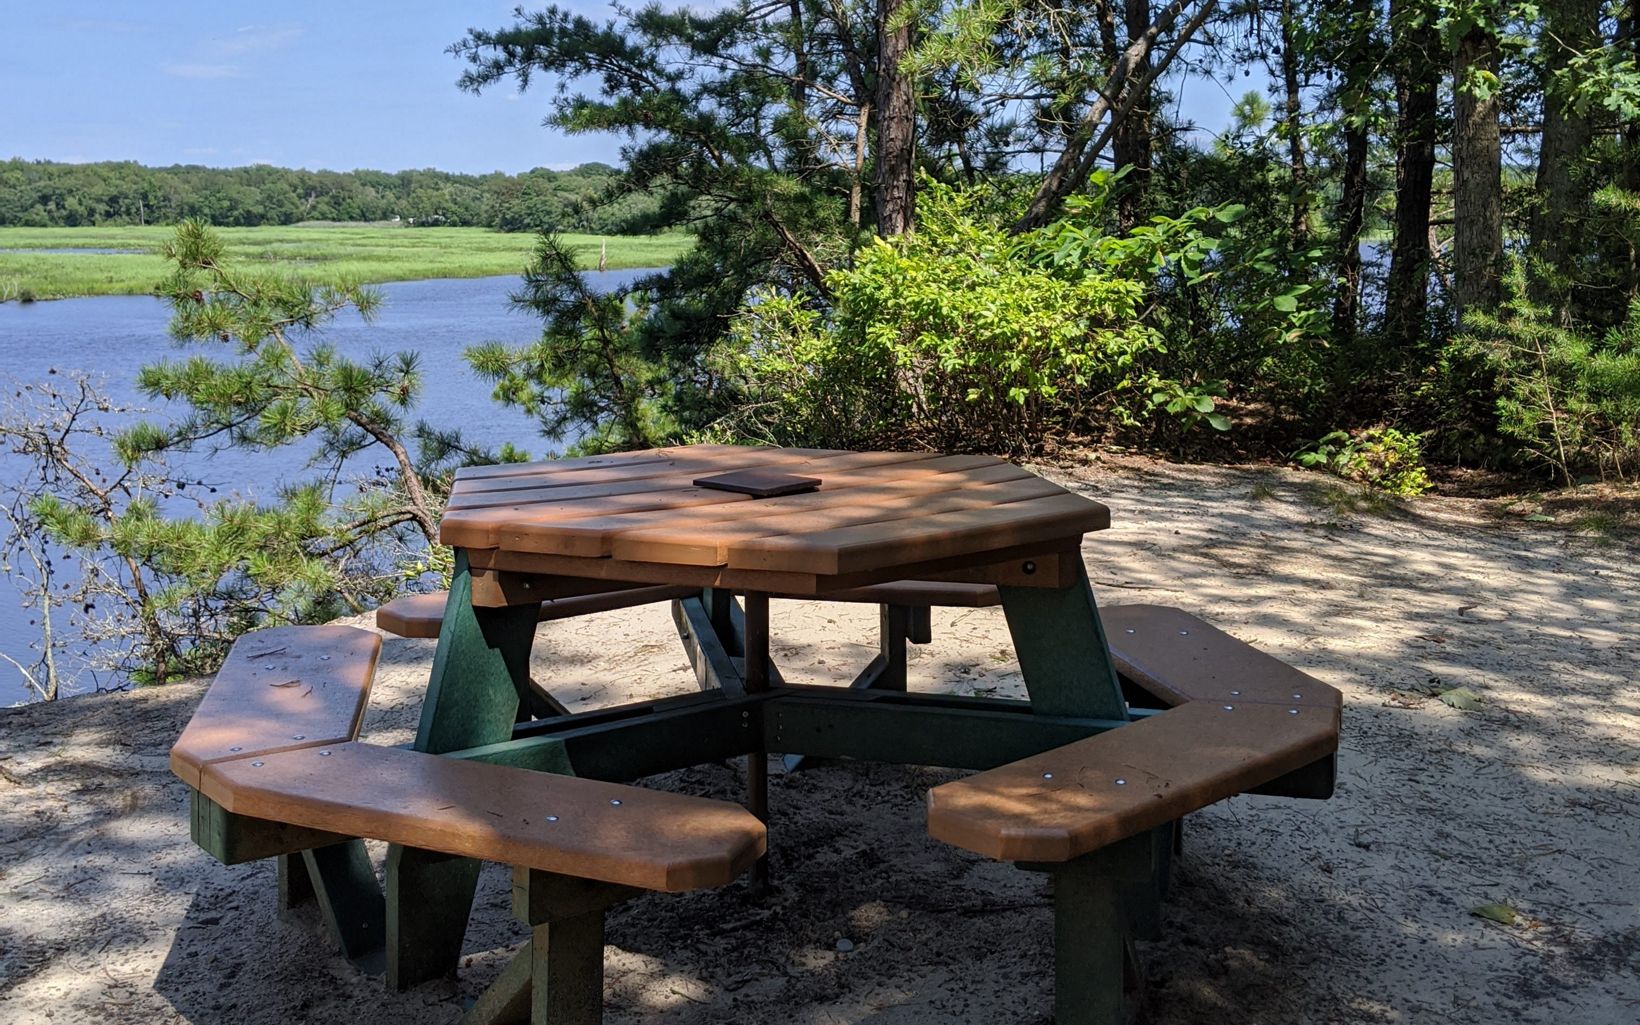 Riverside Picnic Table Picnic tables with views of the Maurice River make for relaxing and scenic lunch spots.  © Lily Mullock / TNC